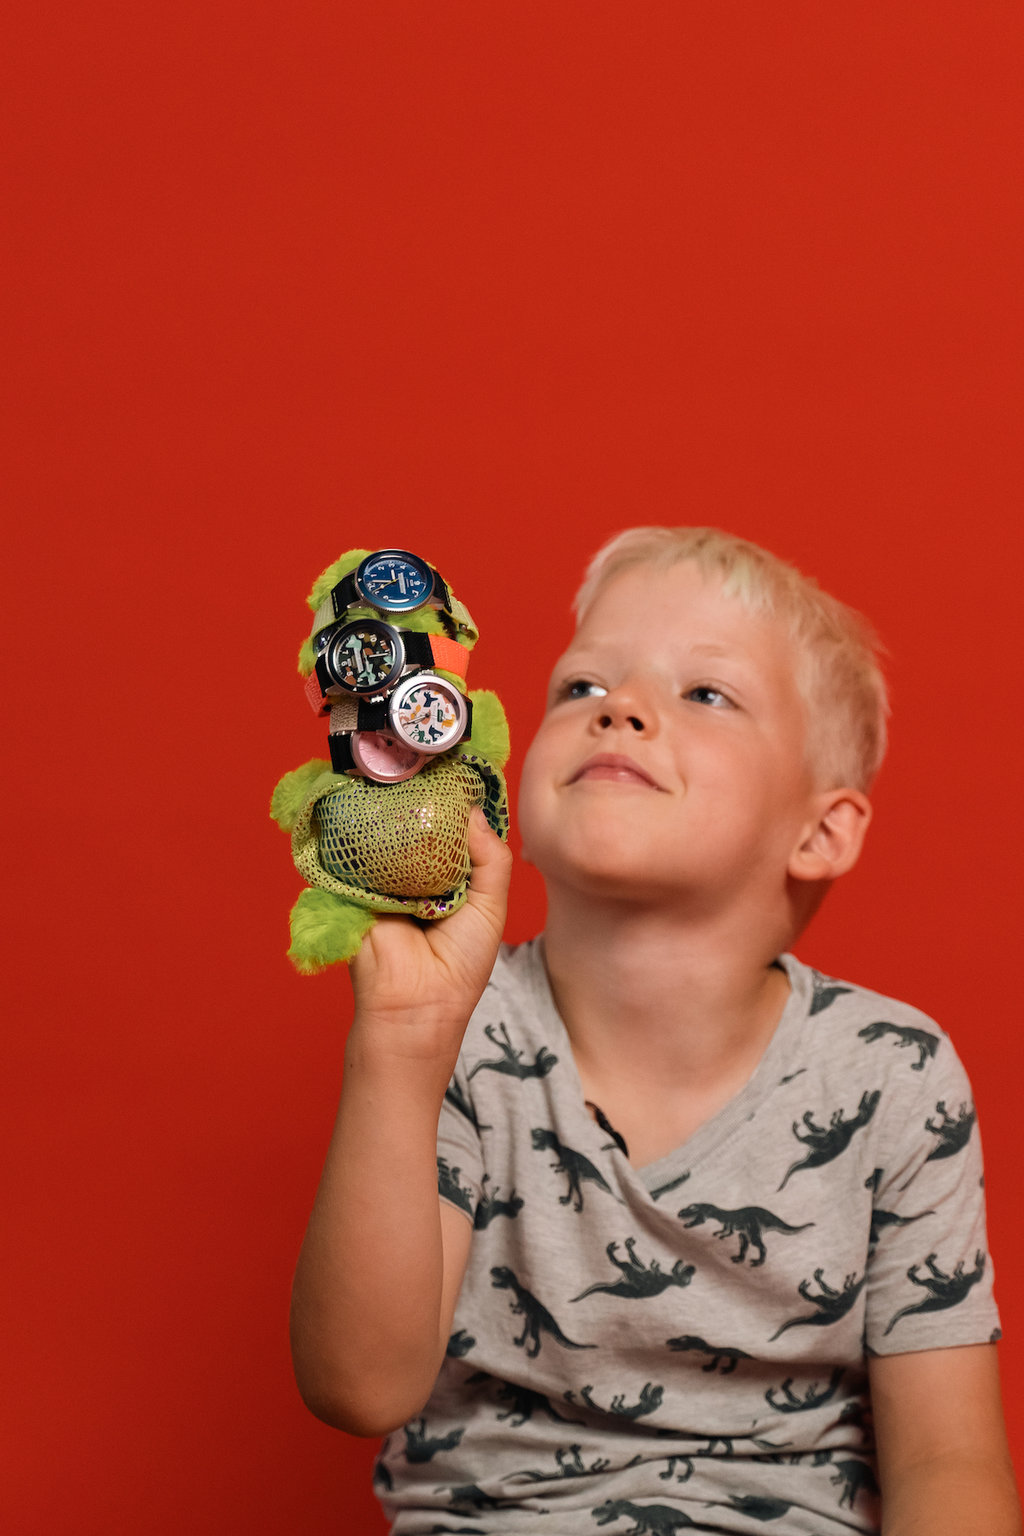 About Vintage: The Smart Way For Kids To Tell Time Without A “Smart” Watch In 2022